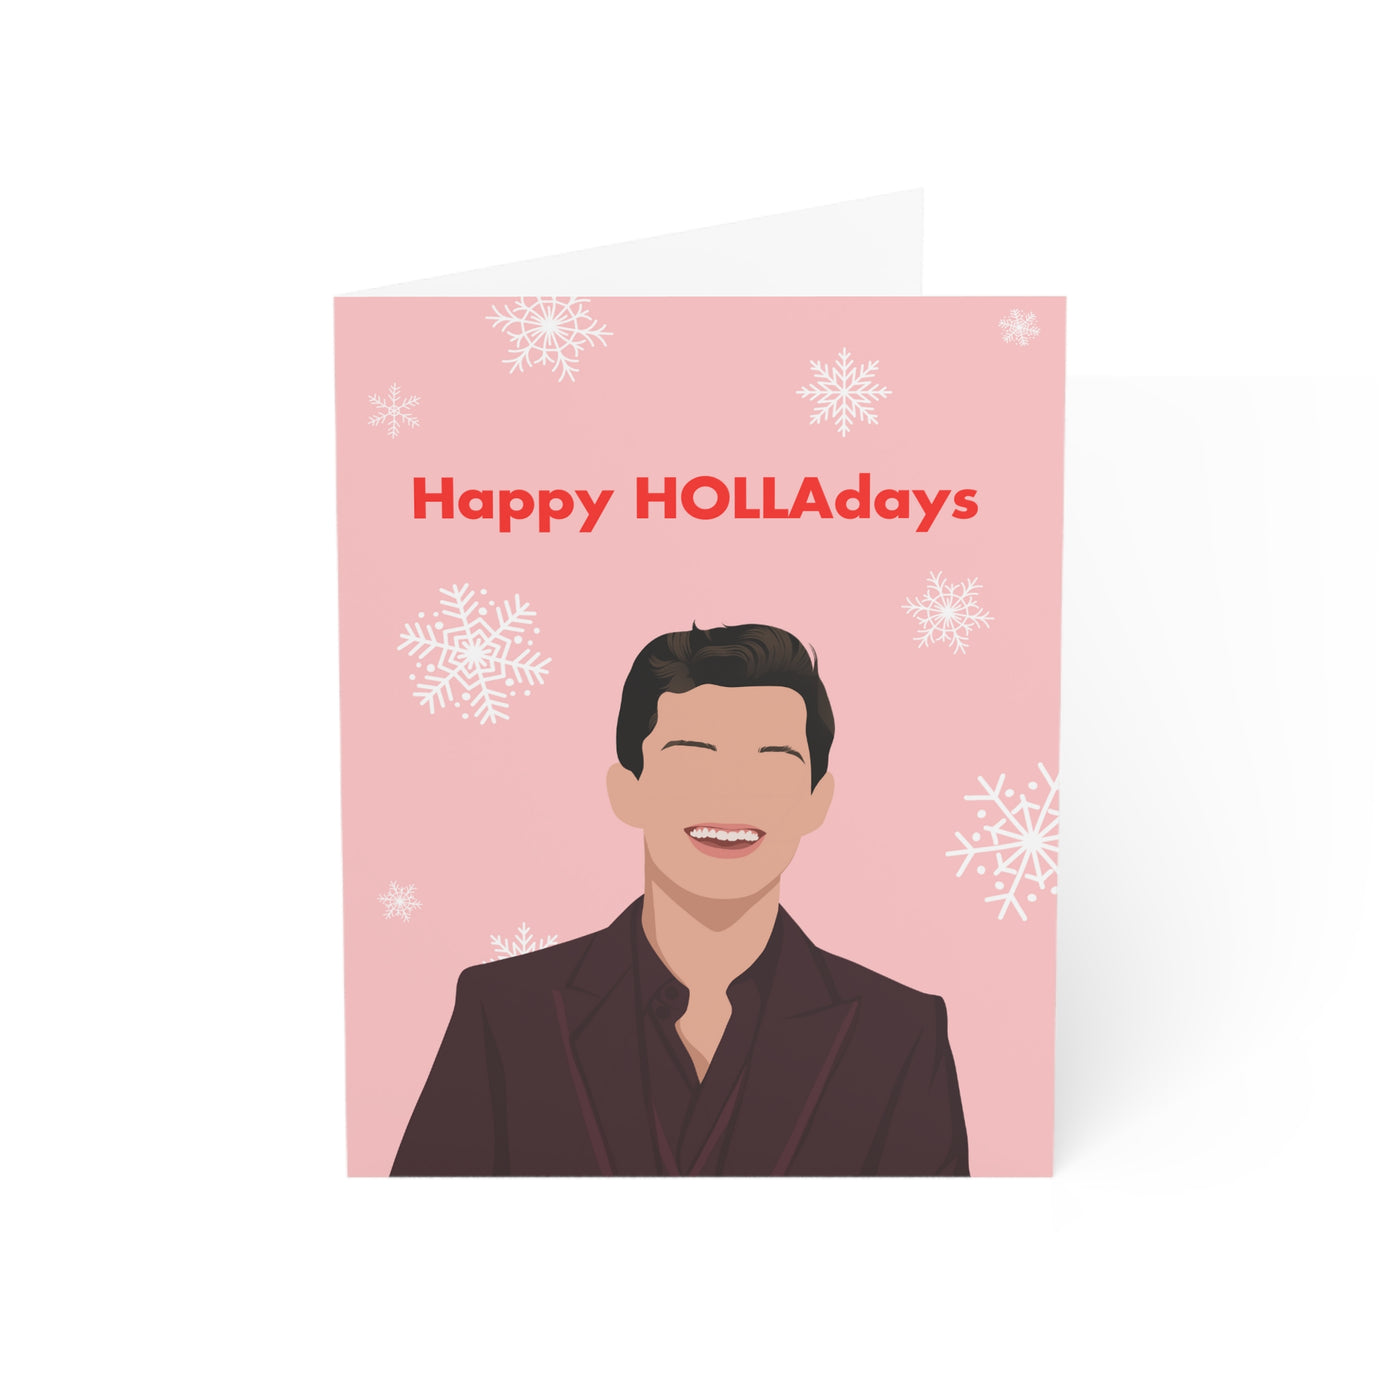 The Holland - Holladay's Holiday Greeting Card